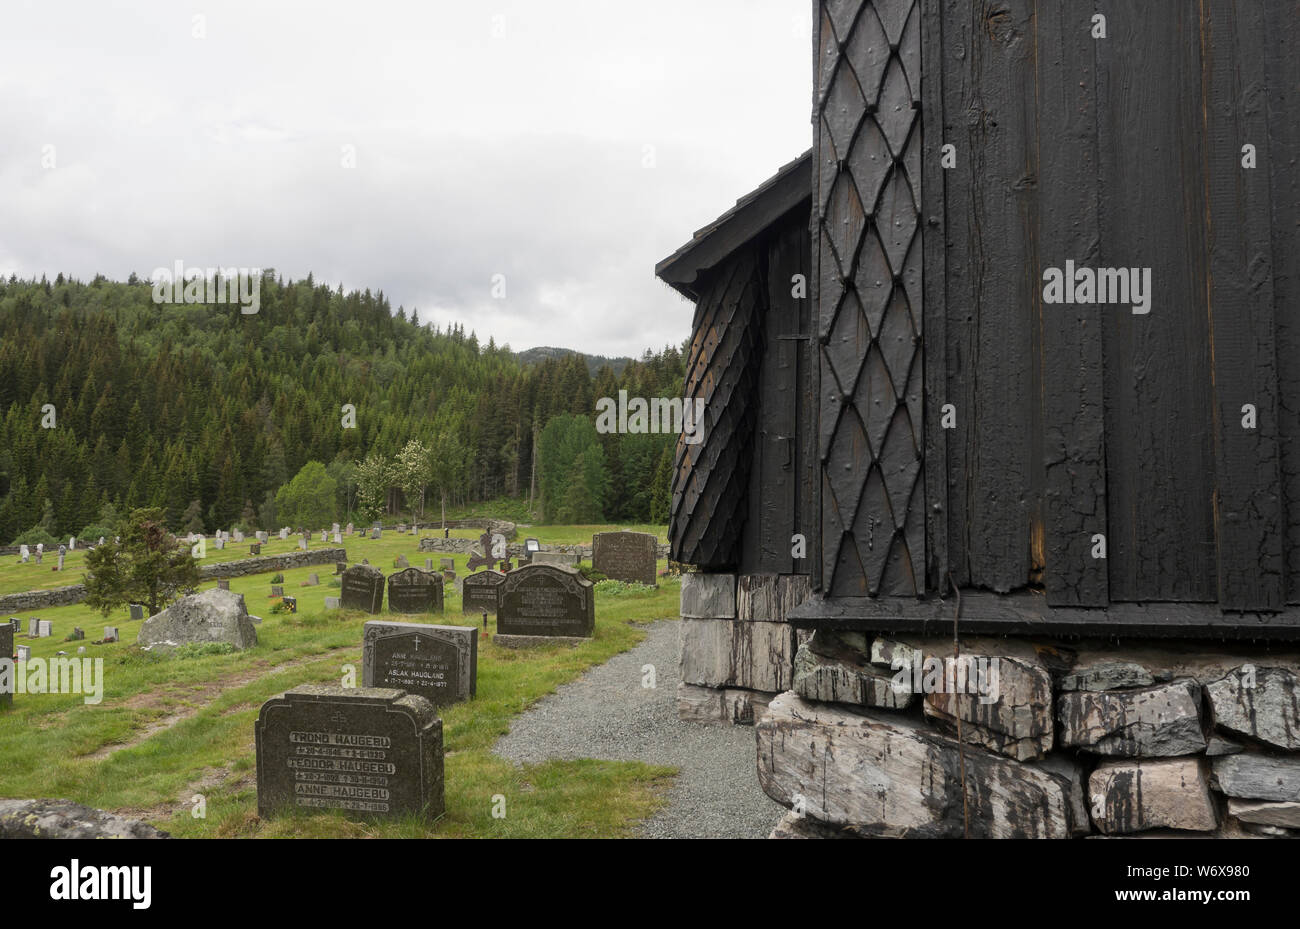 Eidsborg Stave church from the medieval period, a prime example of Norwegian wooden architecture and a tourist attraction, newly tar painted Stock Photo